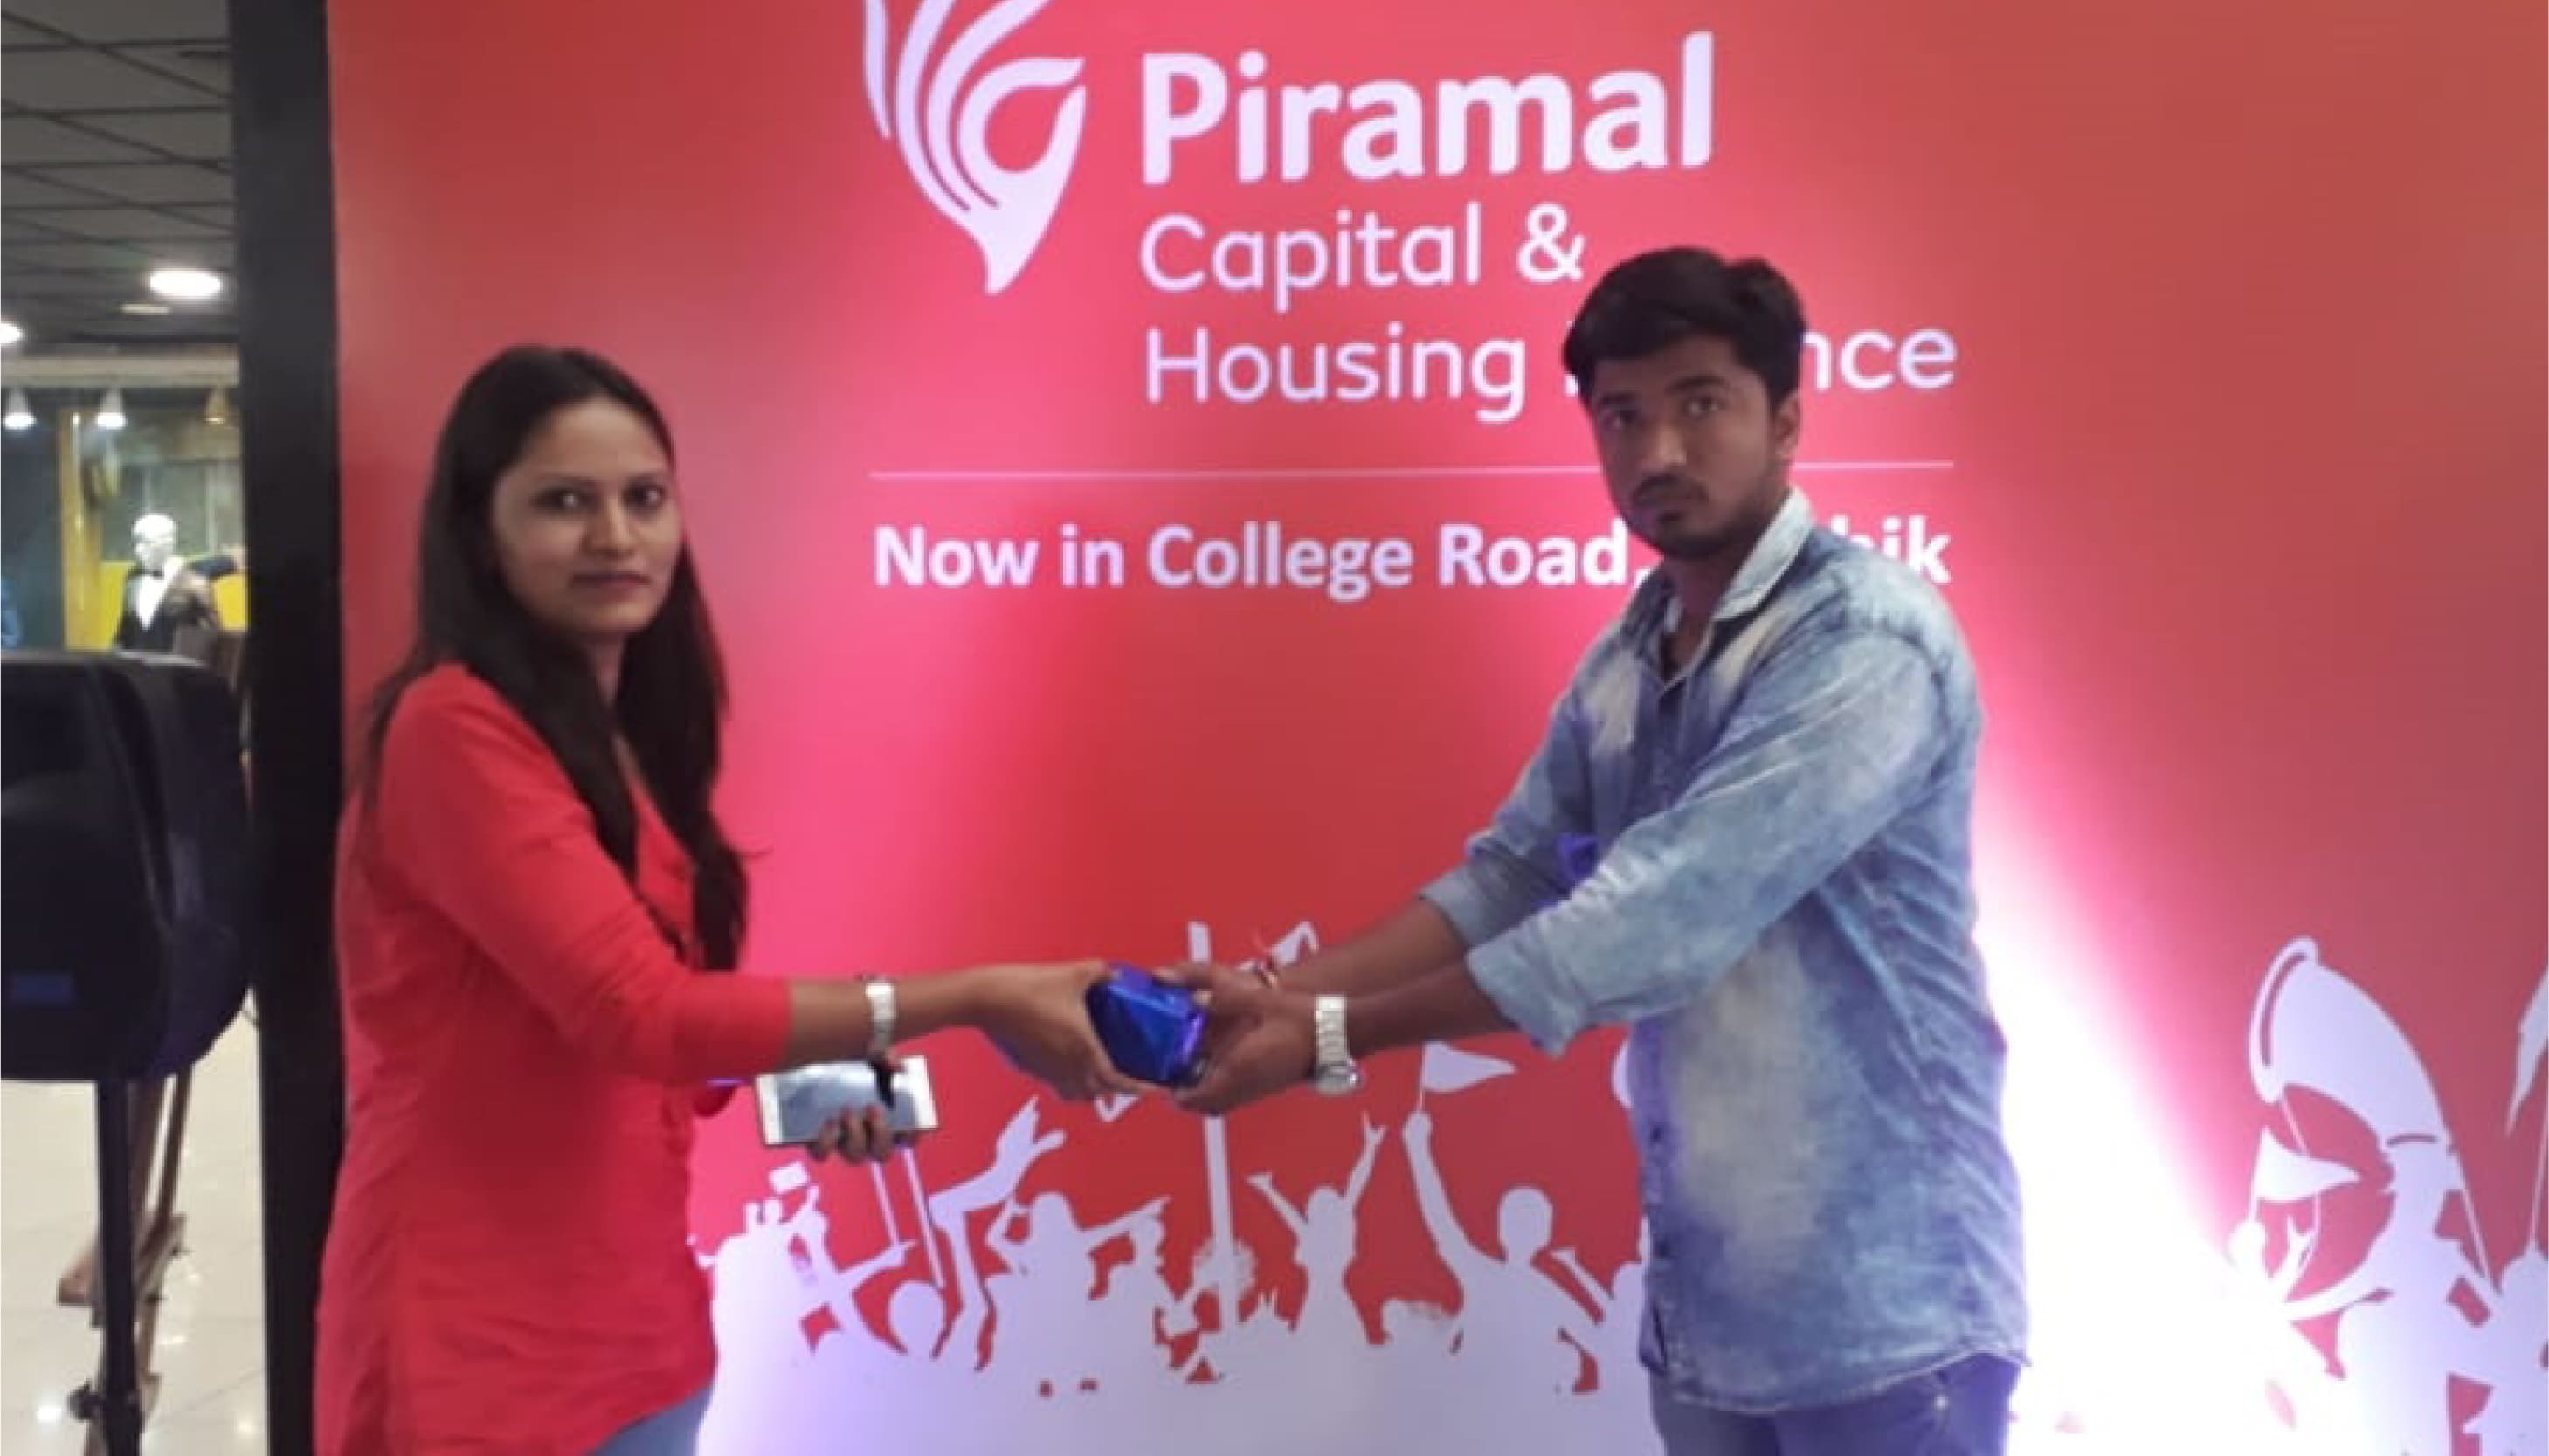 Gifts for people visiting the Piramal capital and housing finance event